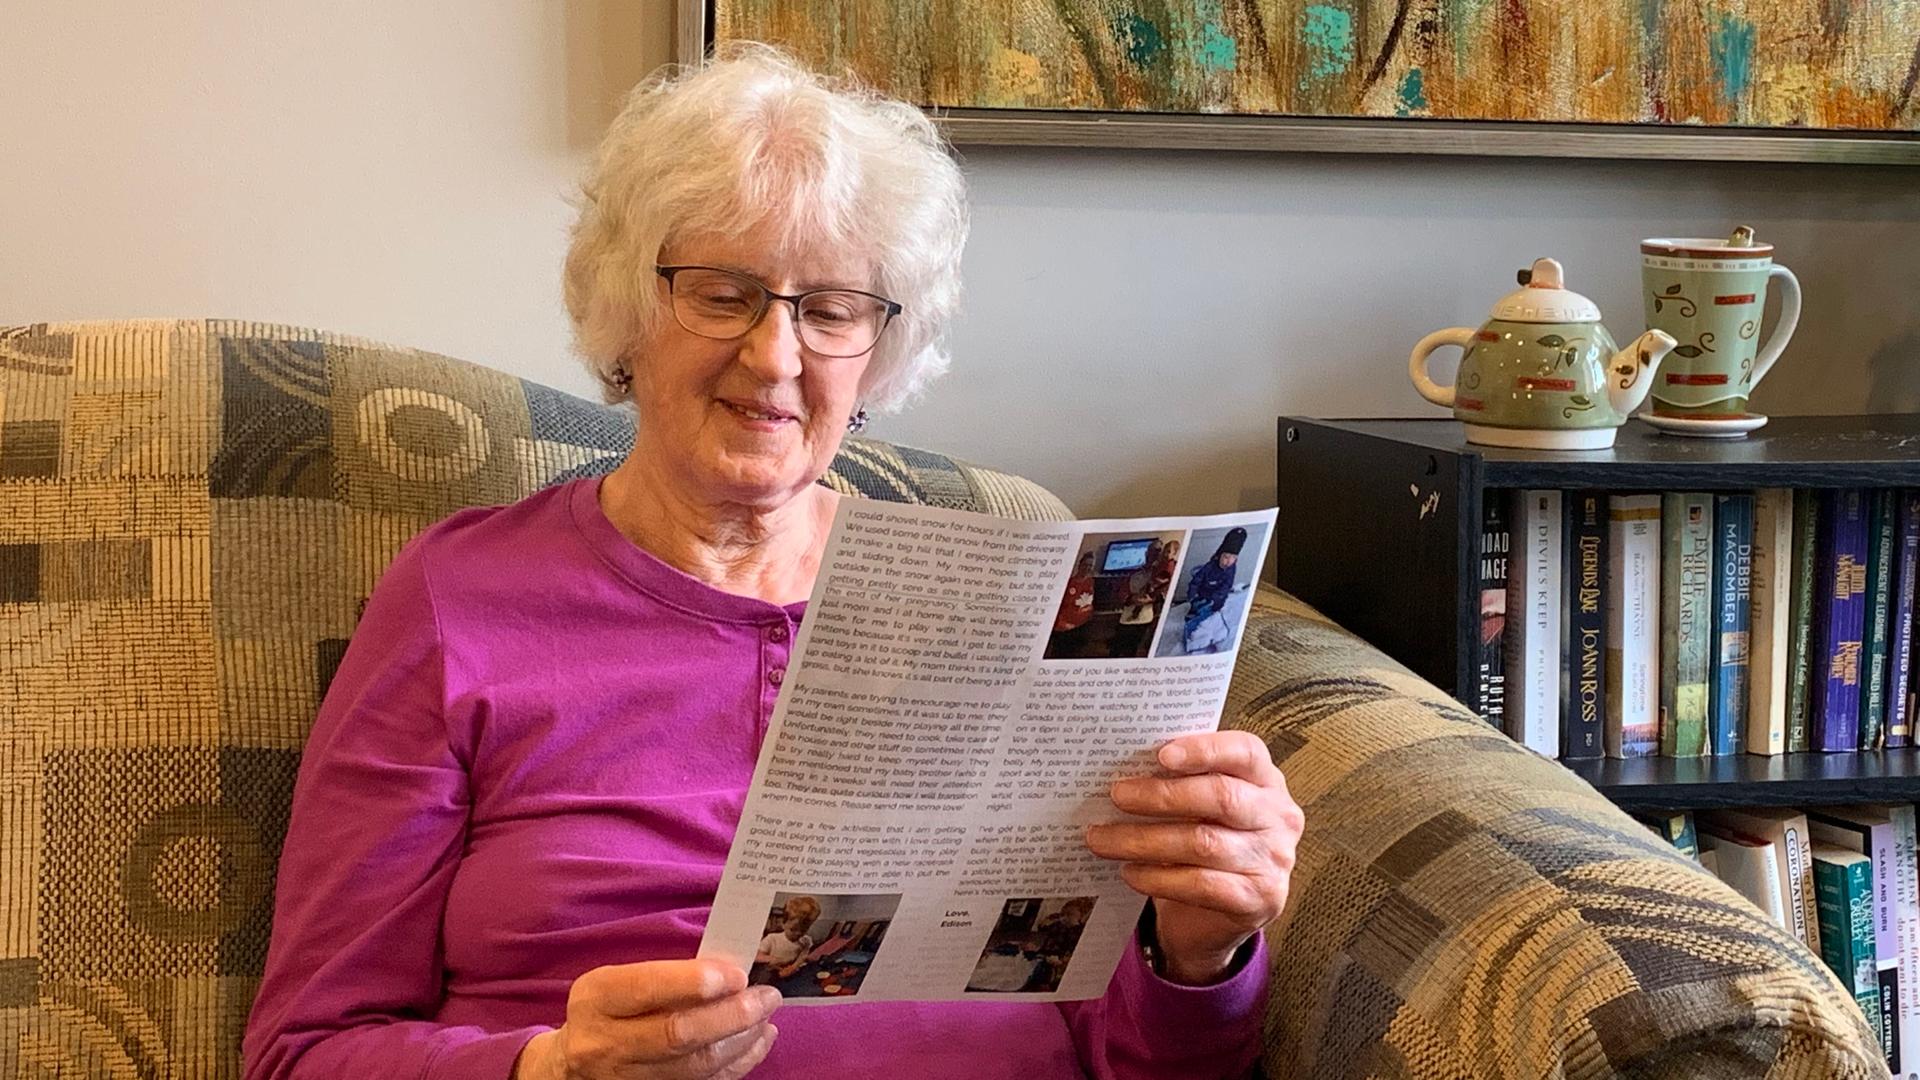 A 91-year-old white woman with gray hair, wearing glasses and a pink top, sits on a sofa and reads a newsletter. 